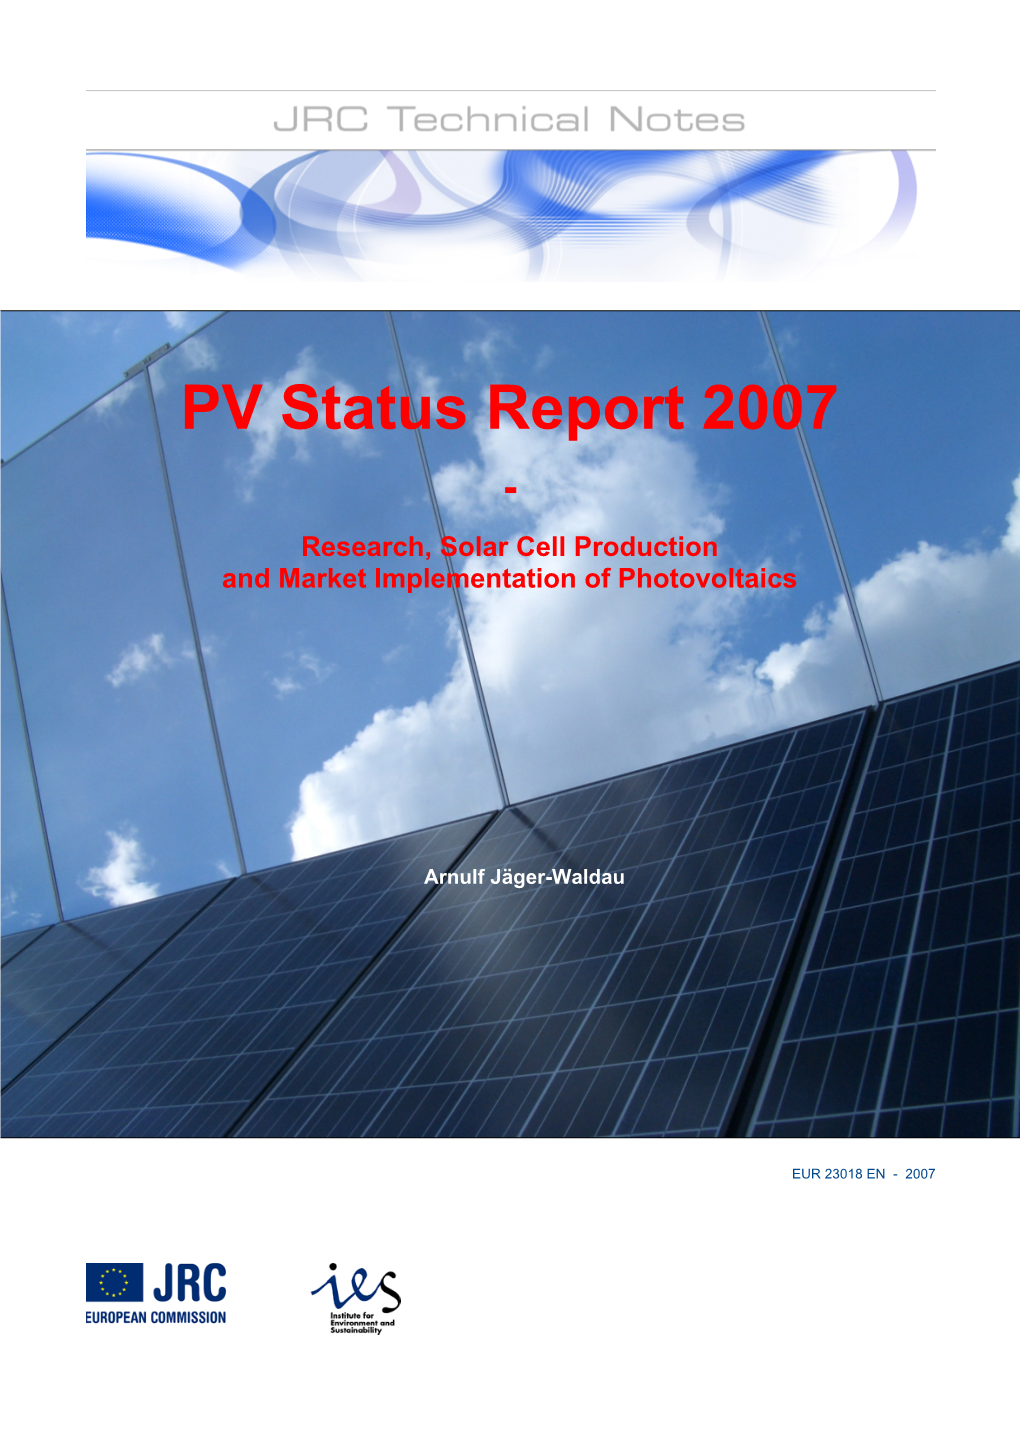 PV Status Report 2007 - Research, Solar Cell Production and Market Implementation of Photovoltaics